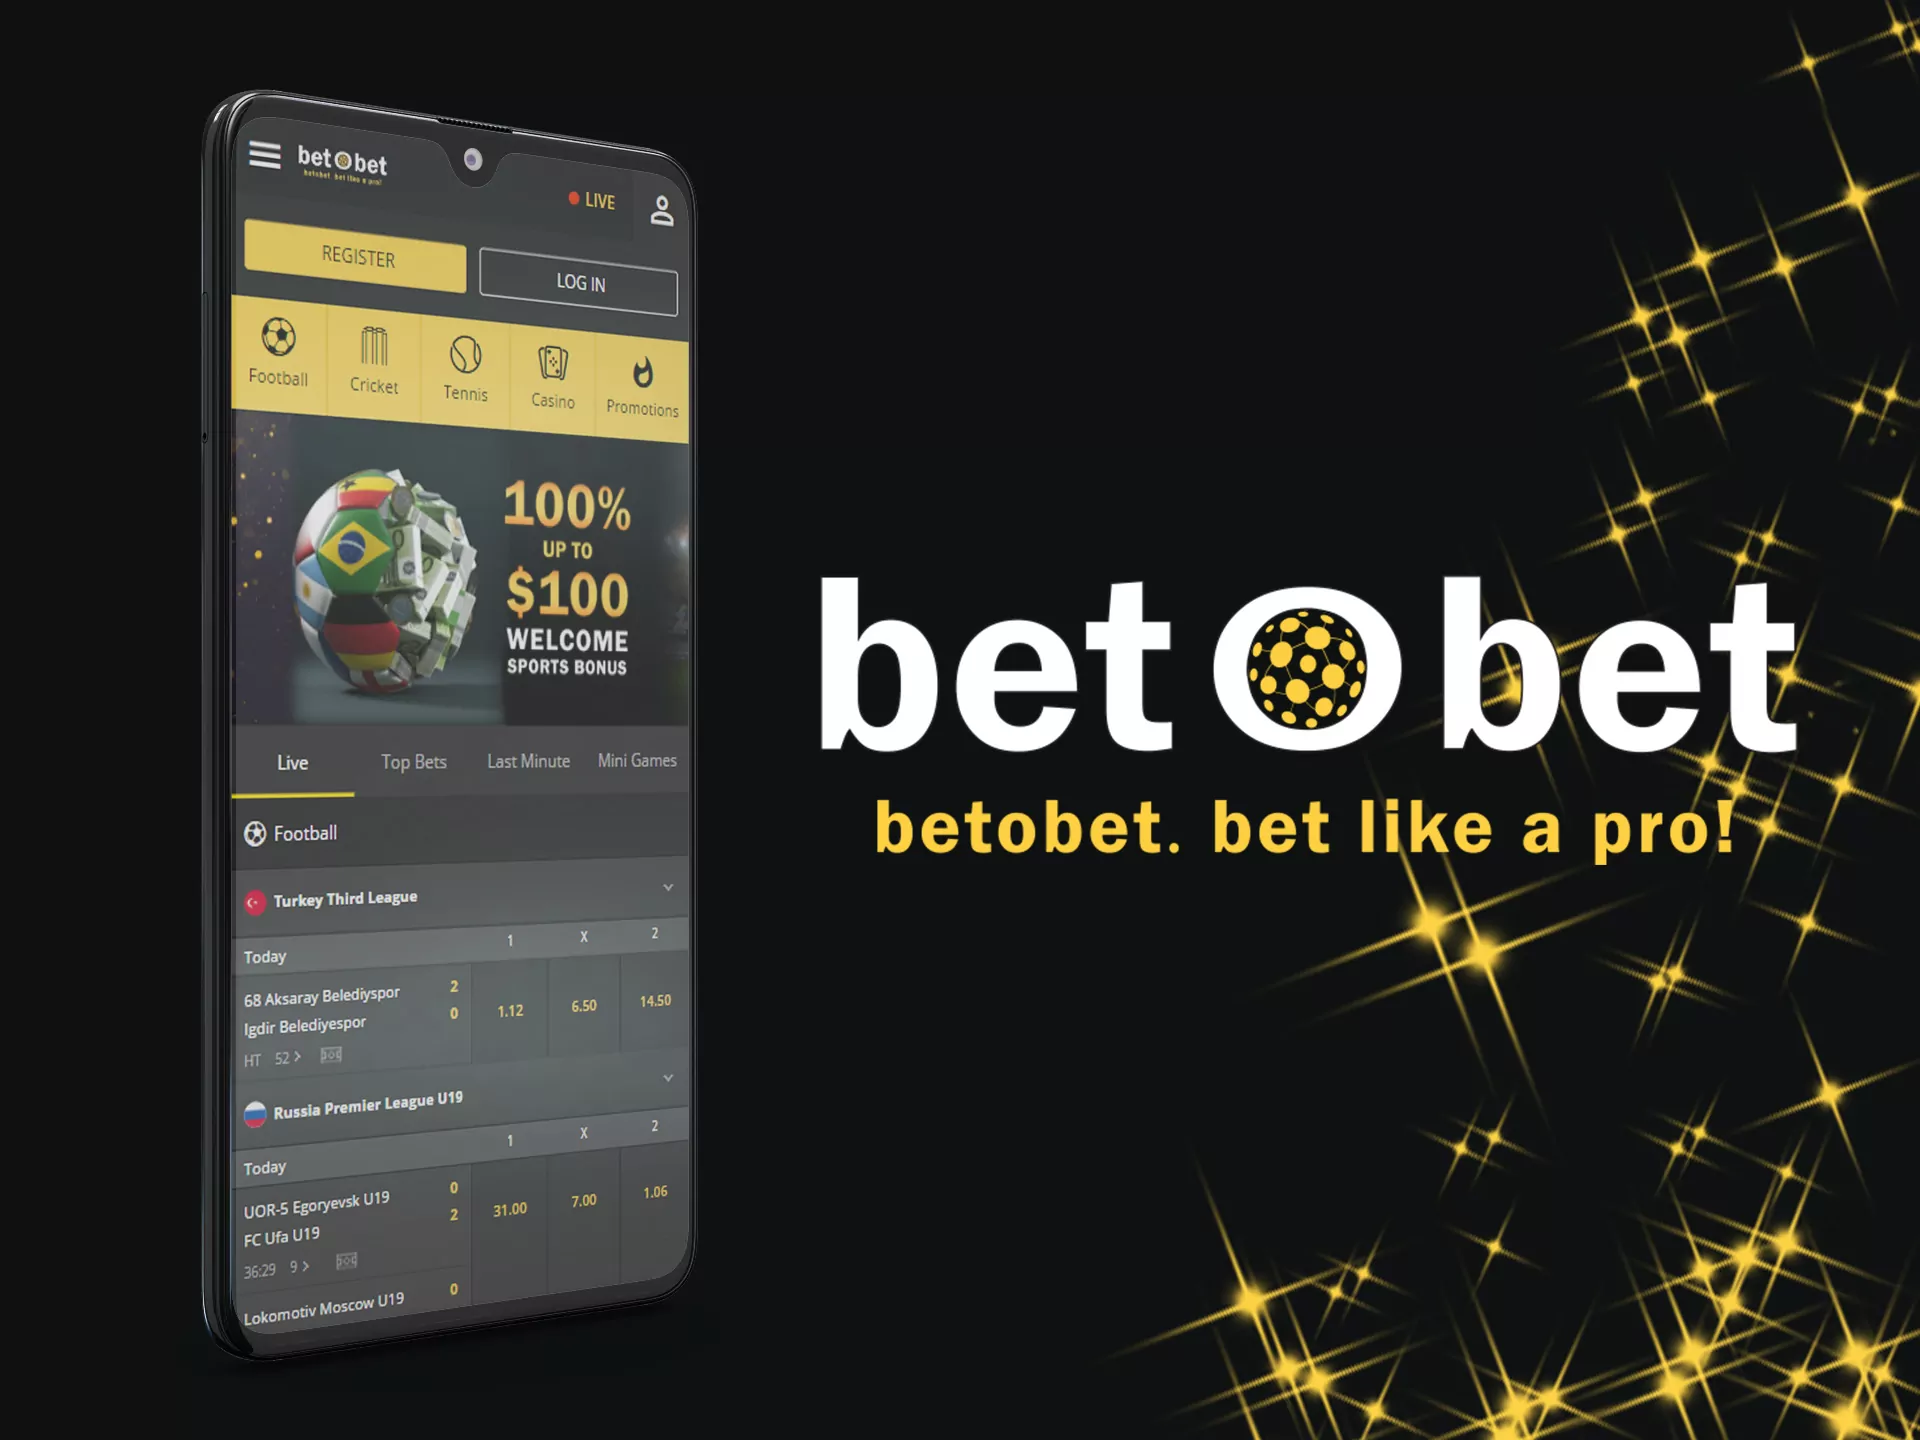 Betobet app allows online betting and casino games.